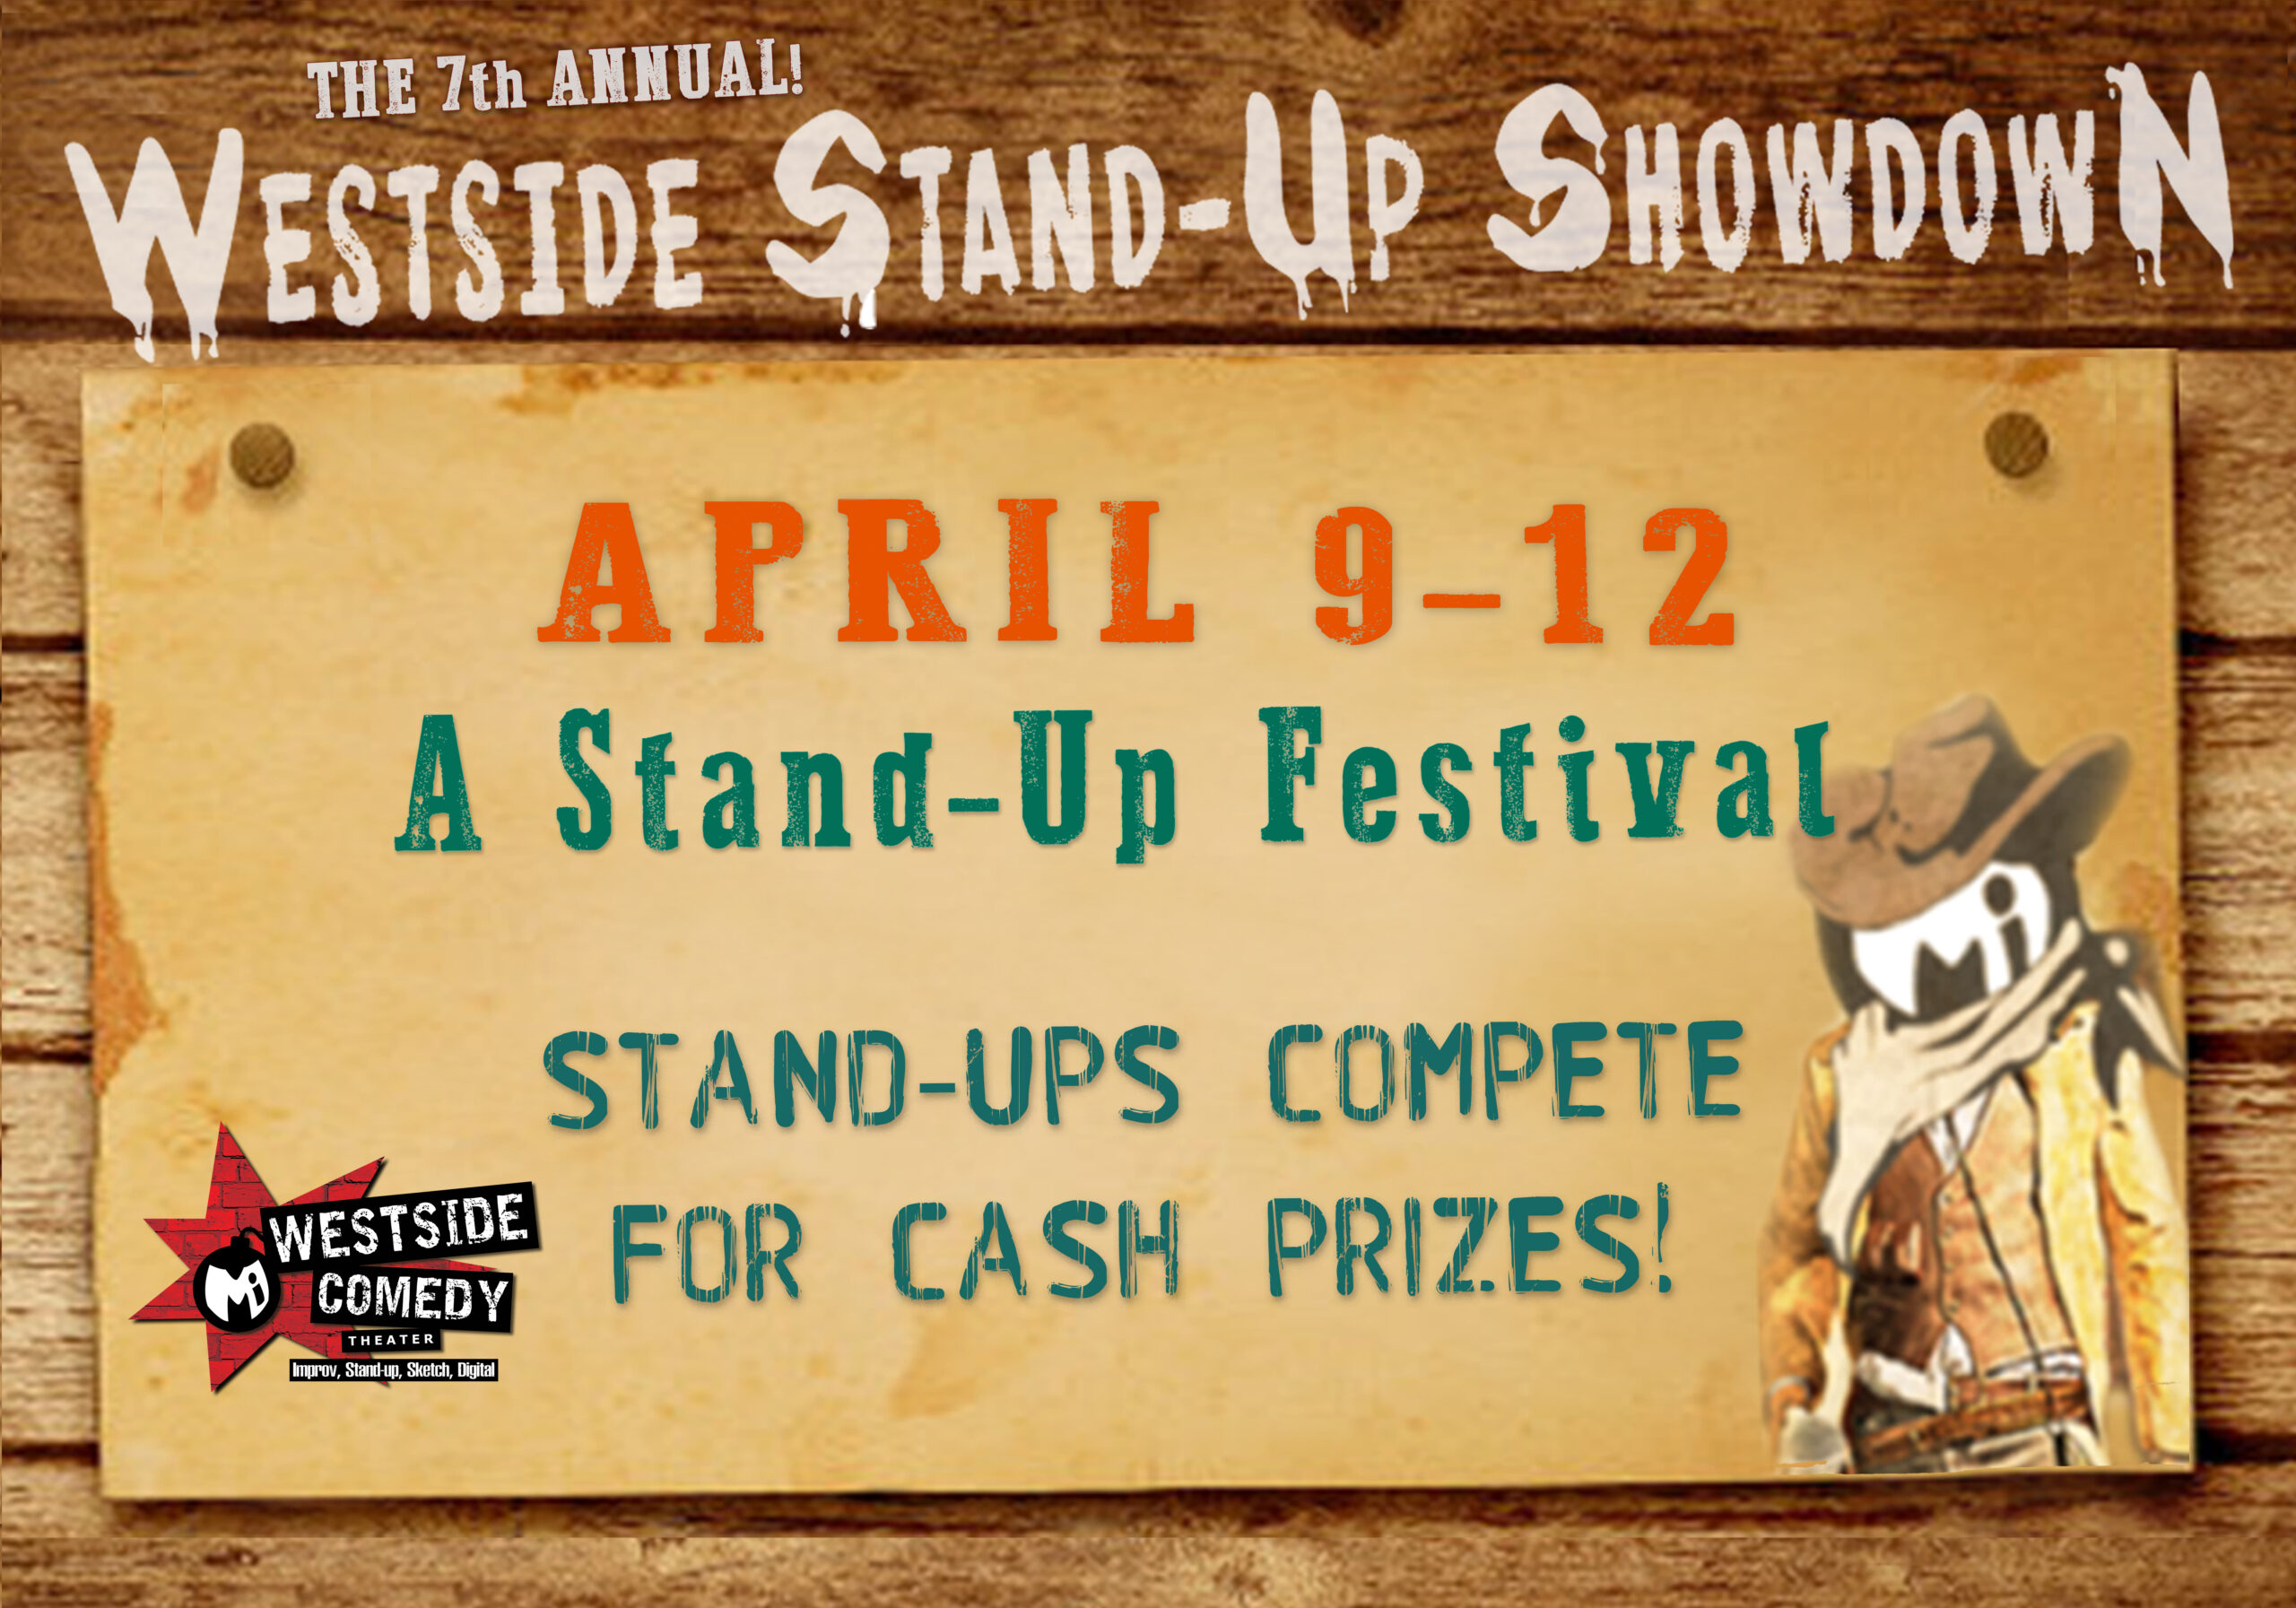 7th Annual Westside Stand Up Showdown